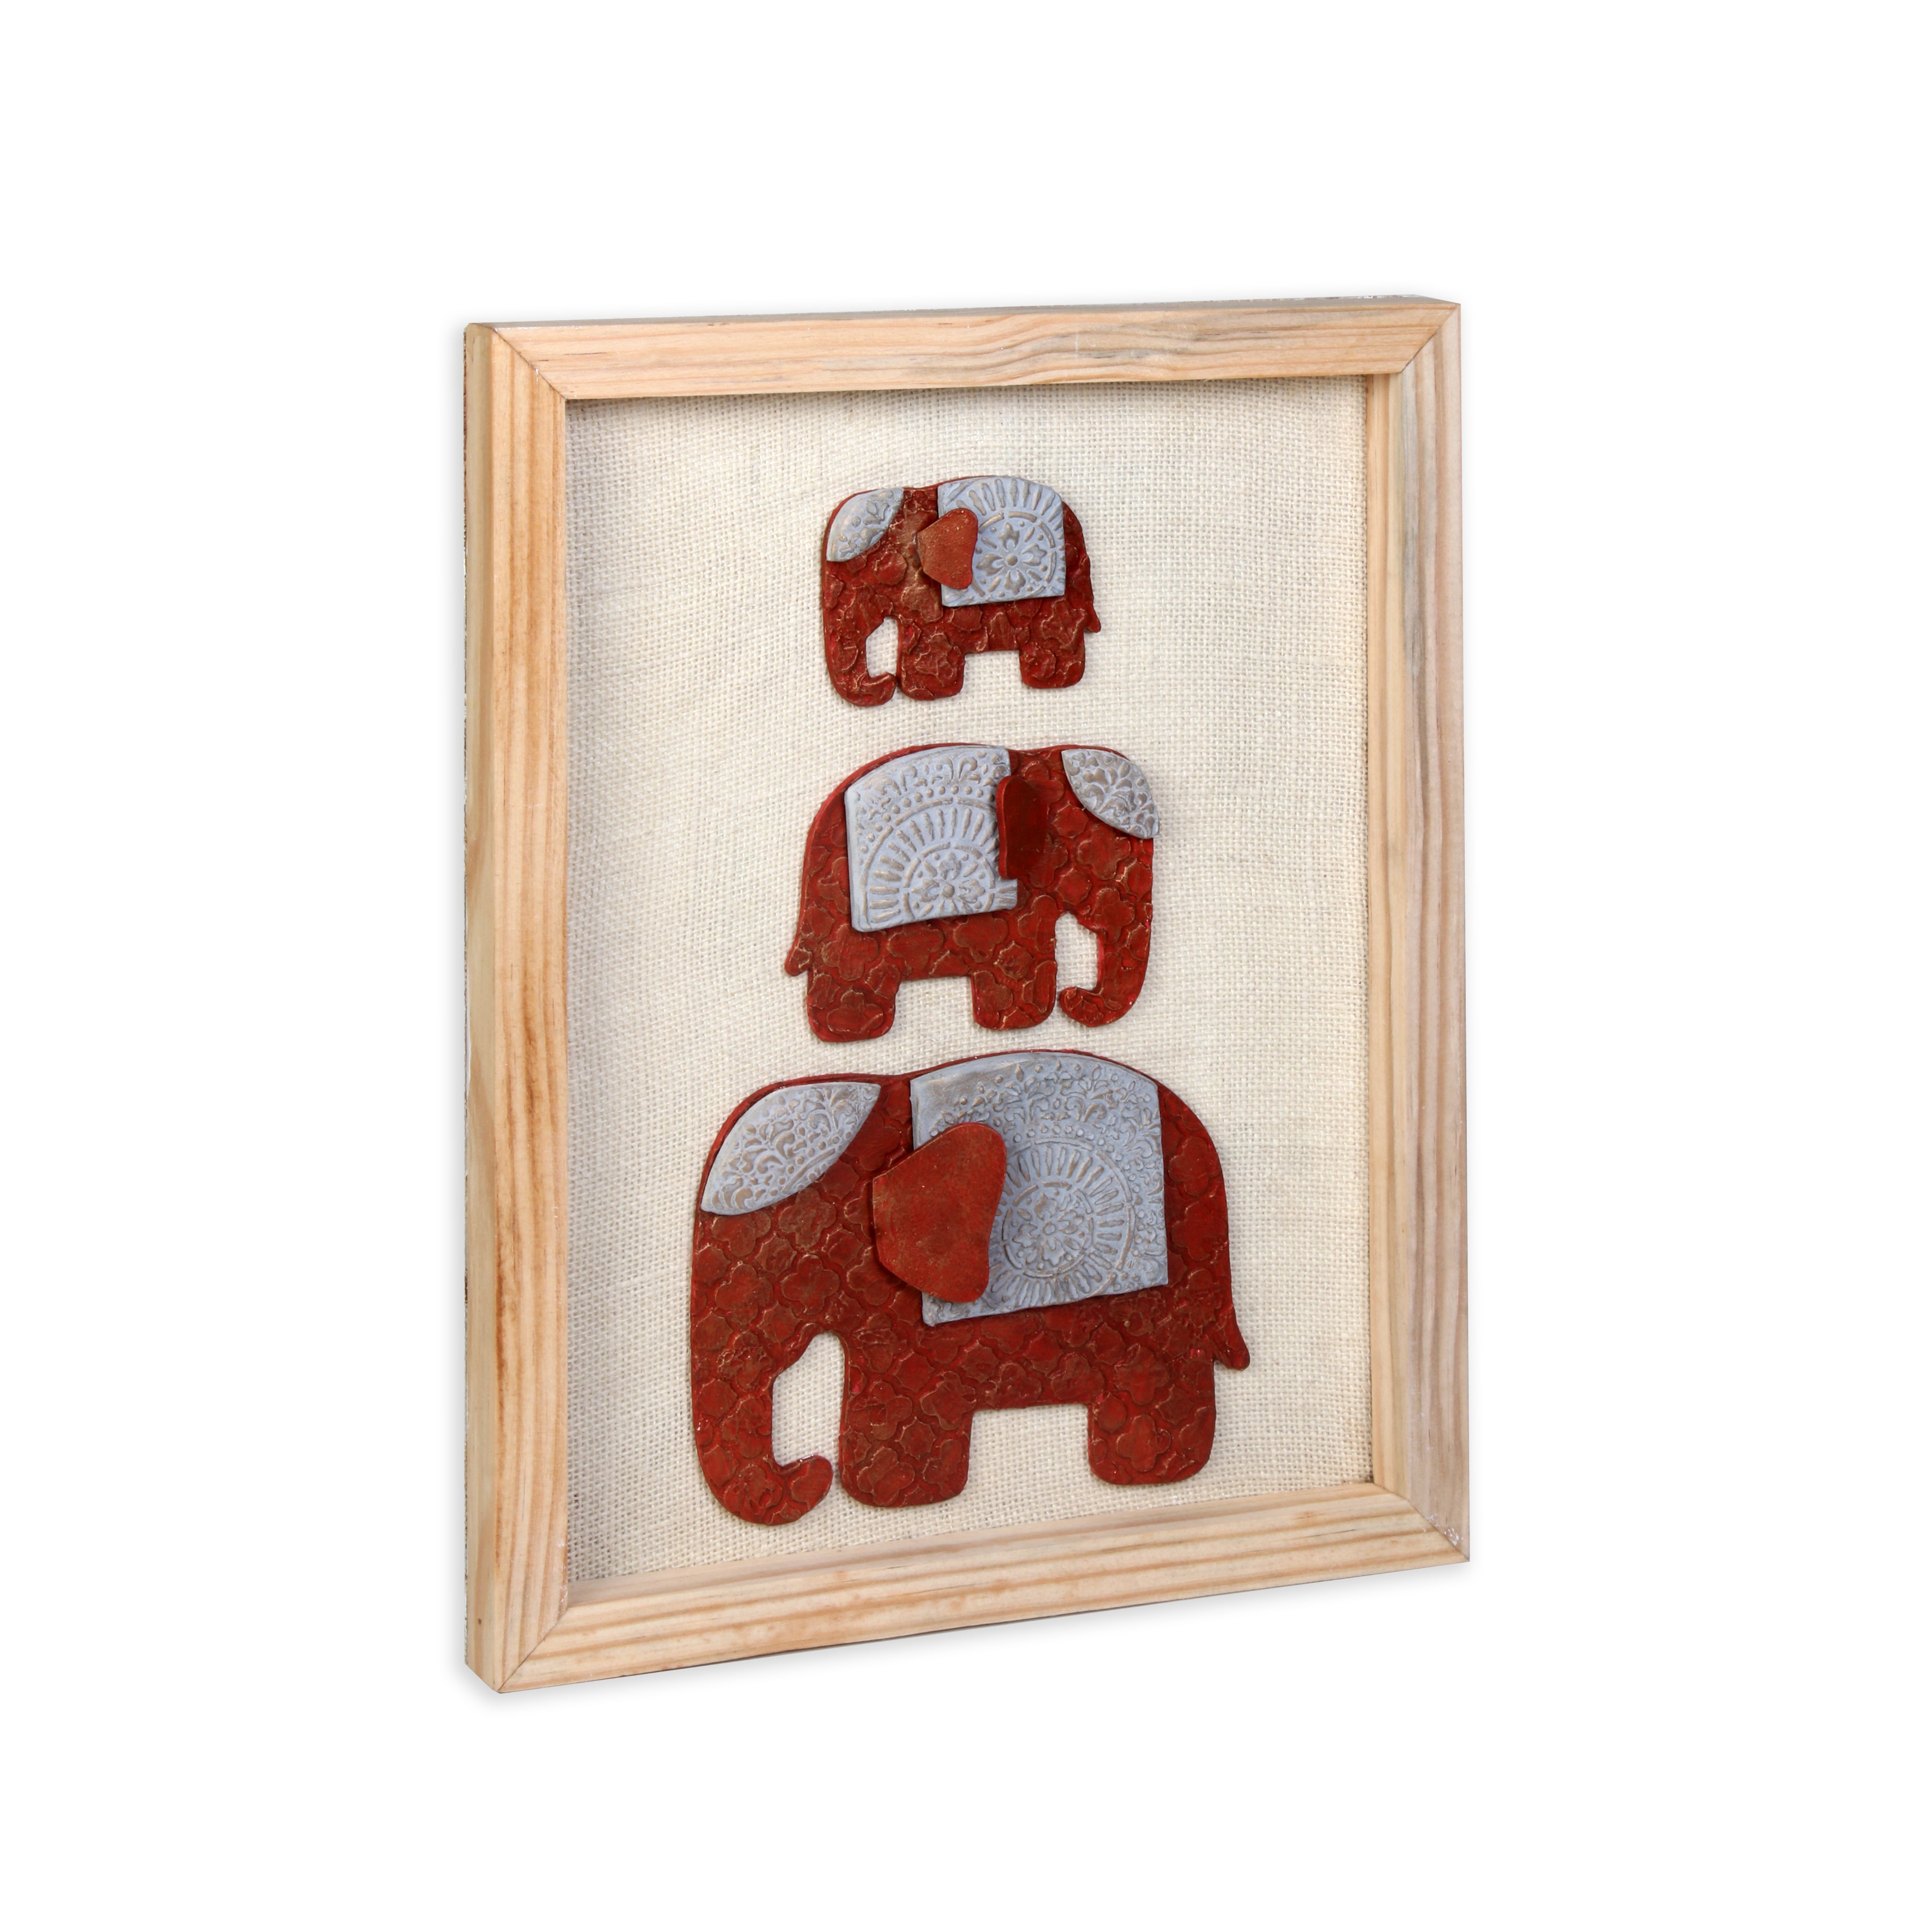 Wall Decor Handmade Majestic Elephant Red and white with Wooden Frame Approx H14 X L11 X D0.66inch